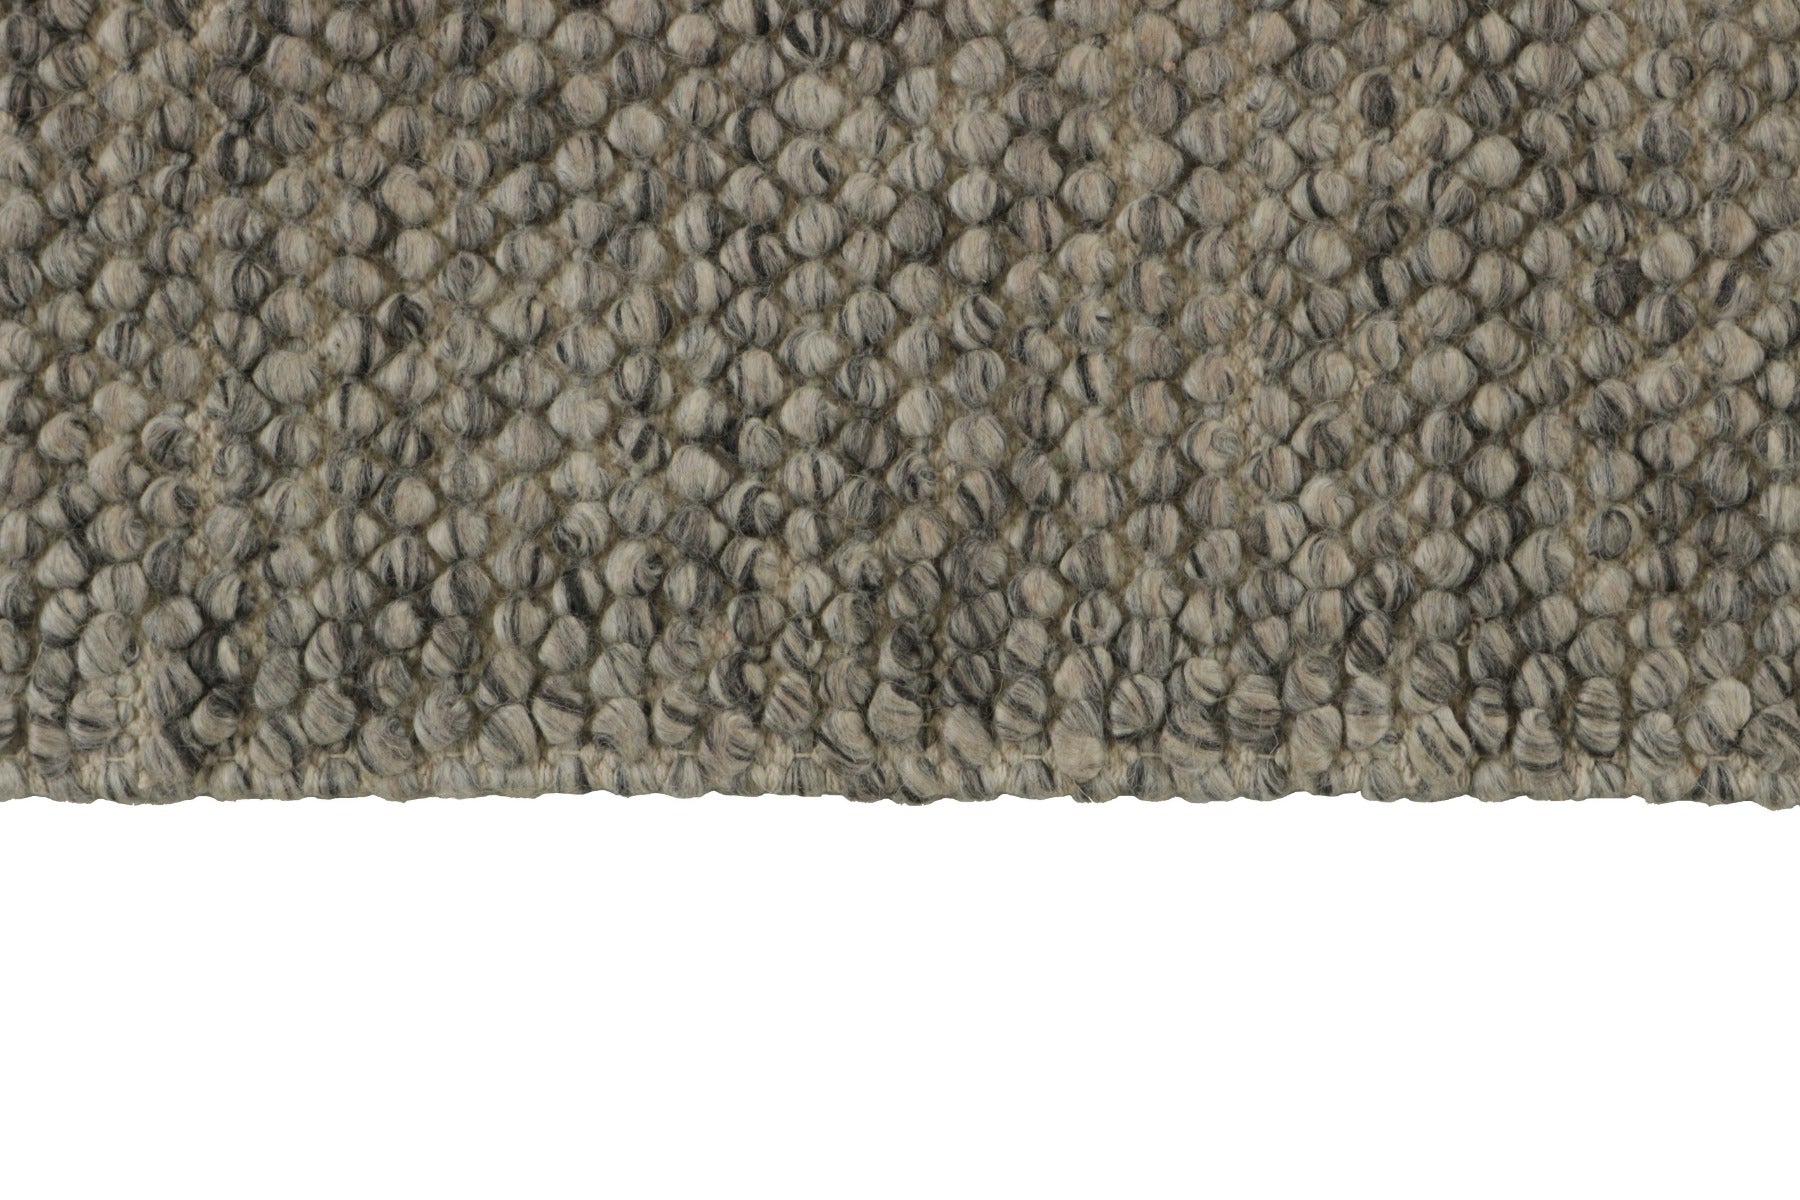 grey and brown textured rug
